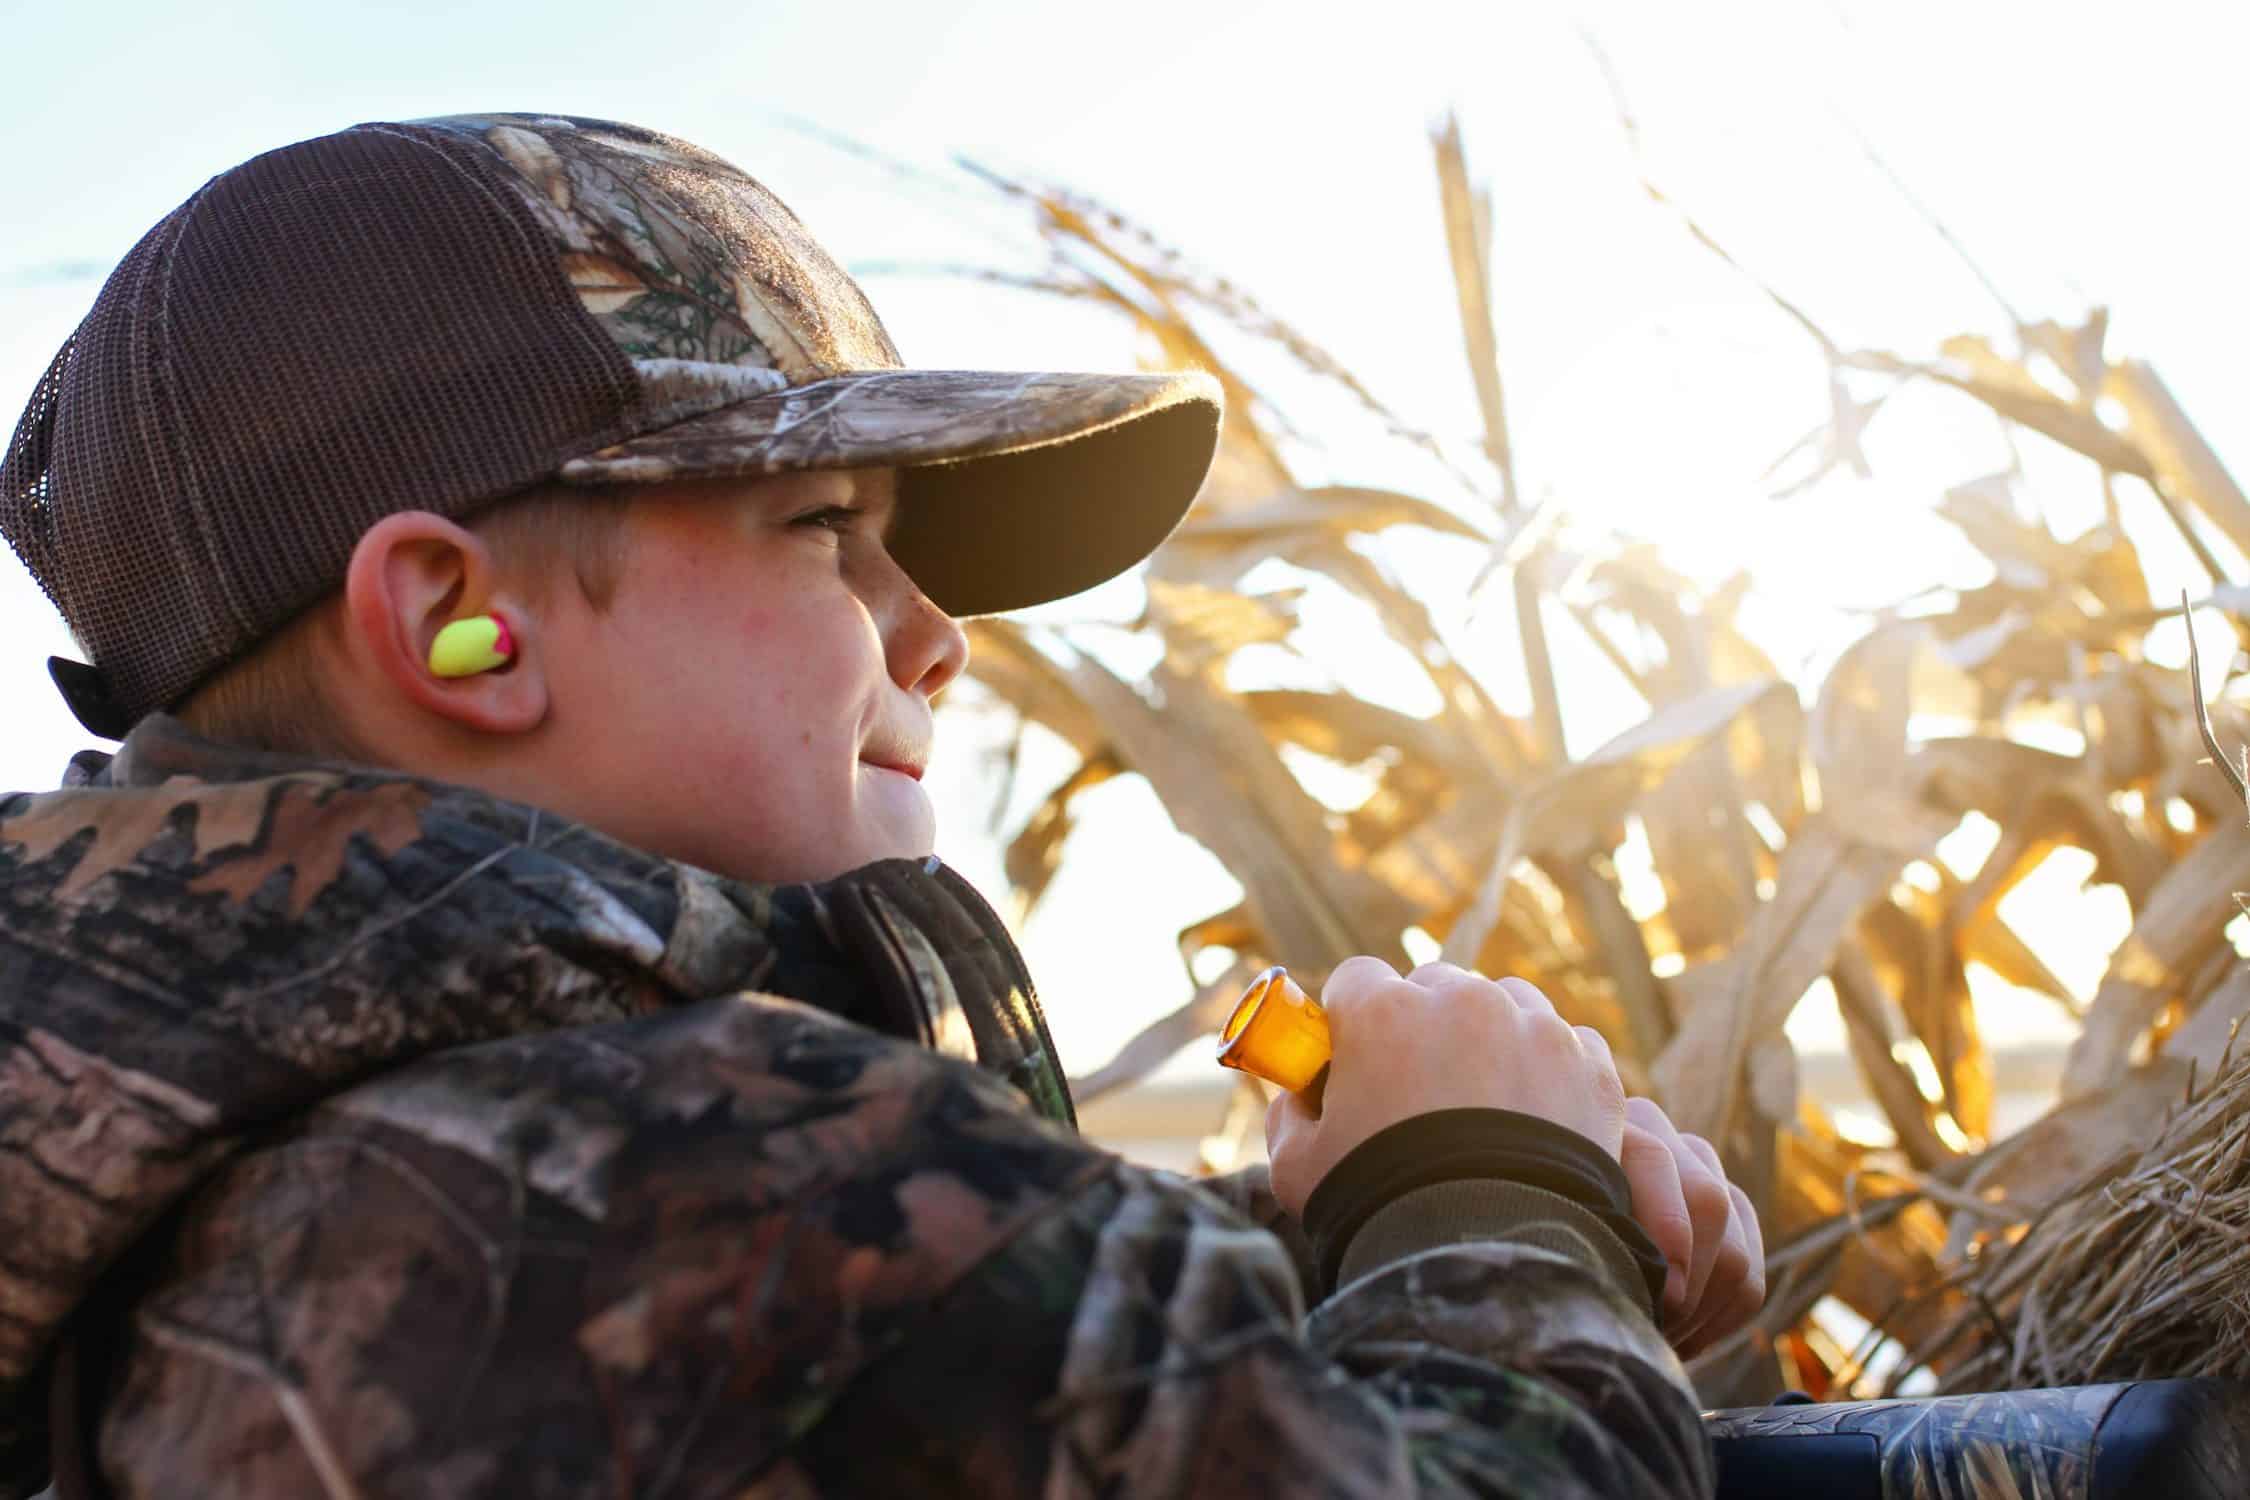 teaching kids to respect the animal - hunting with kids